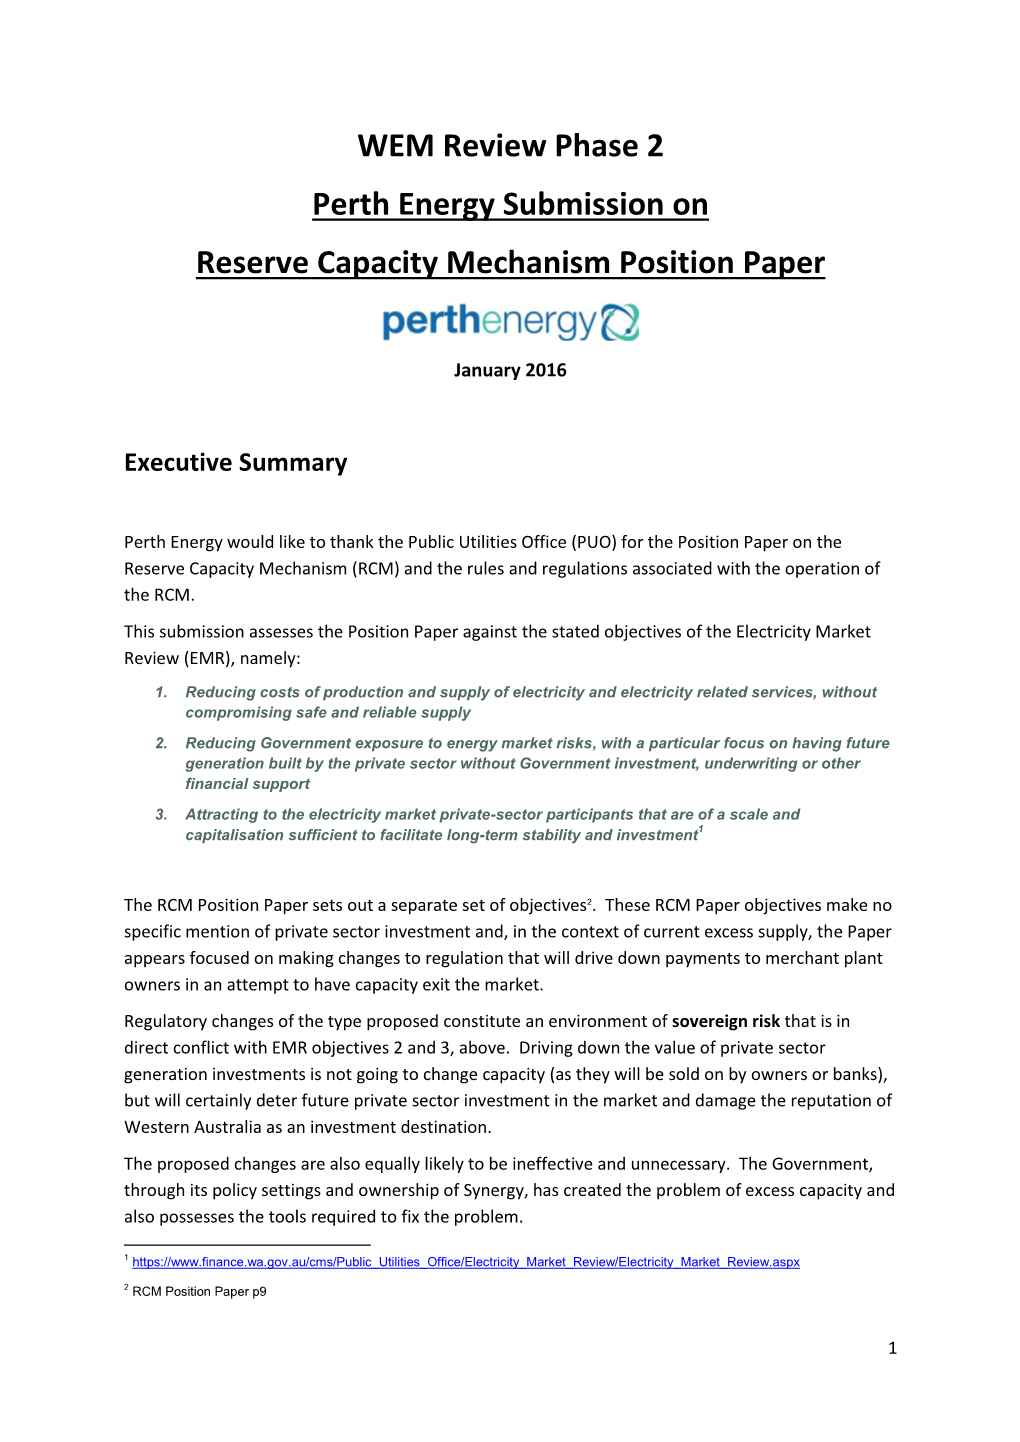 WEM Review Phase 2 Perth Energy Submission on Reserve Capacity Mechanism Position Paper